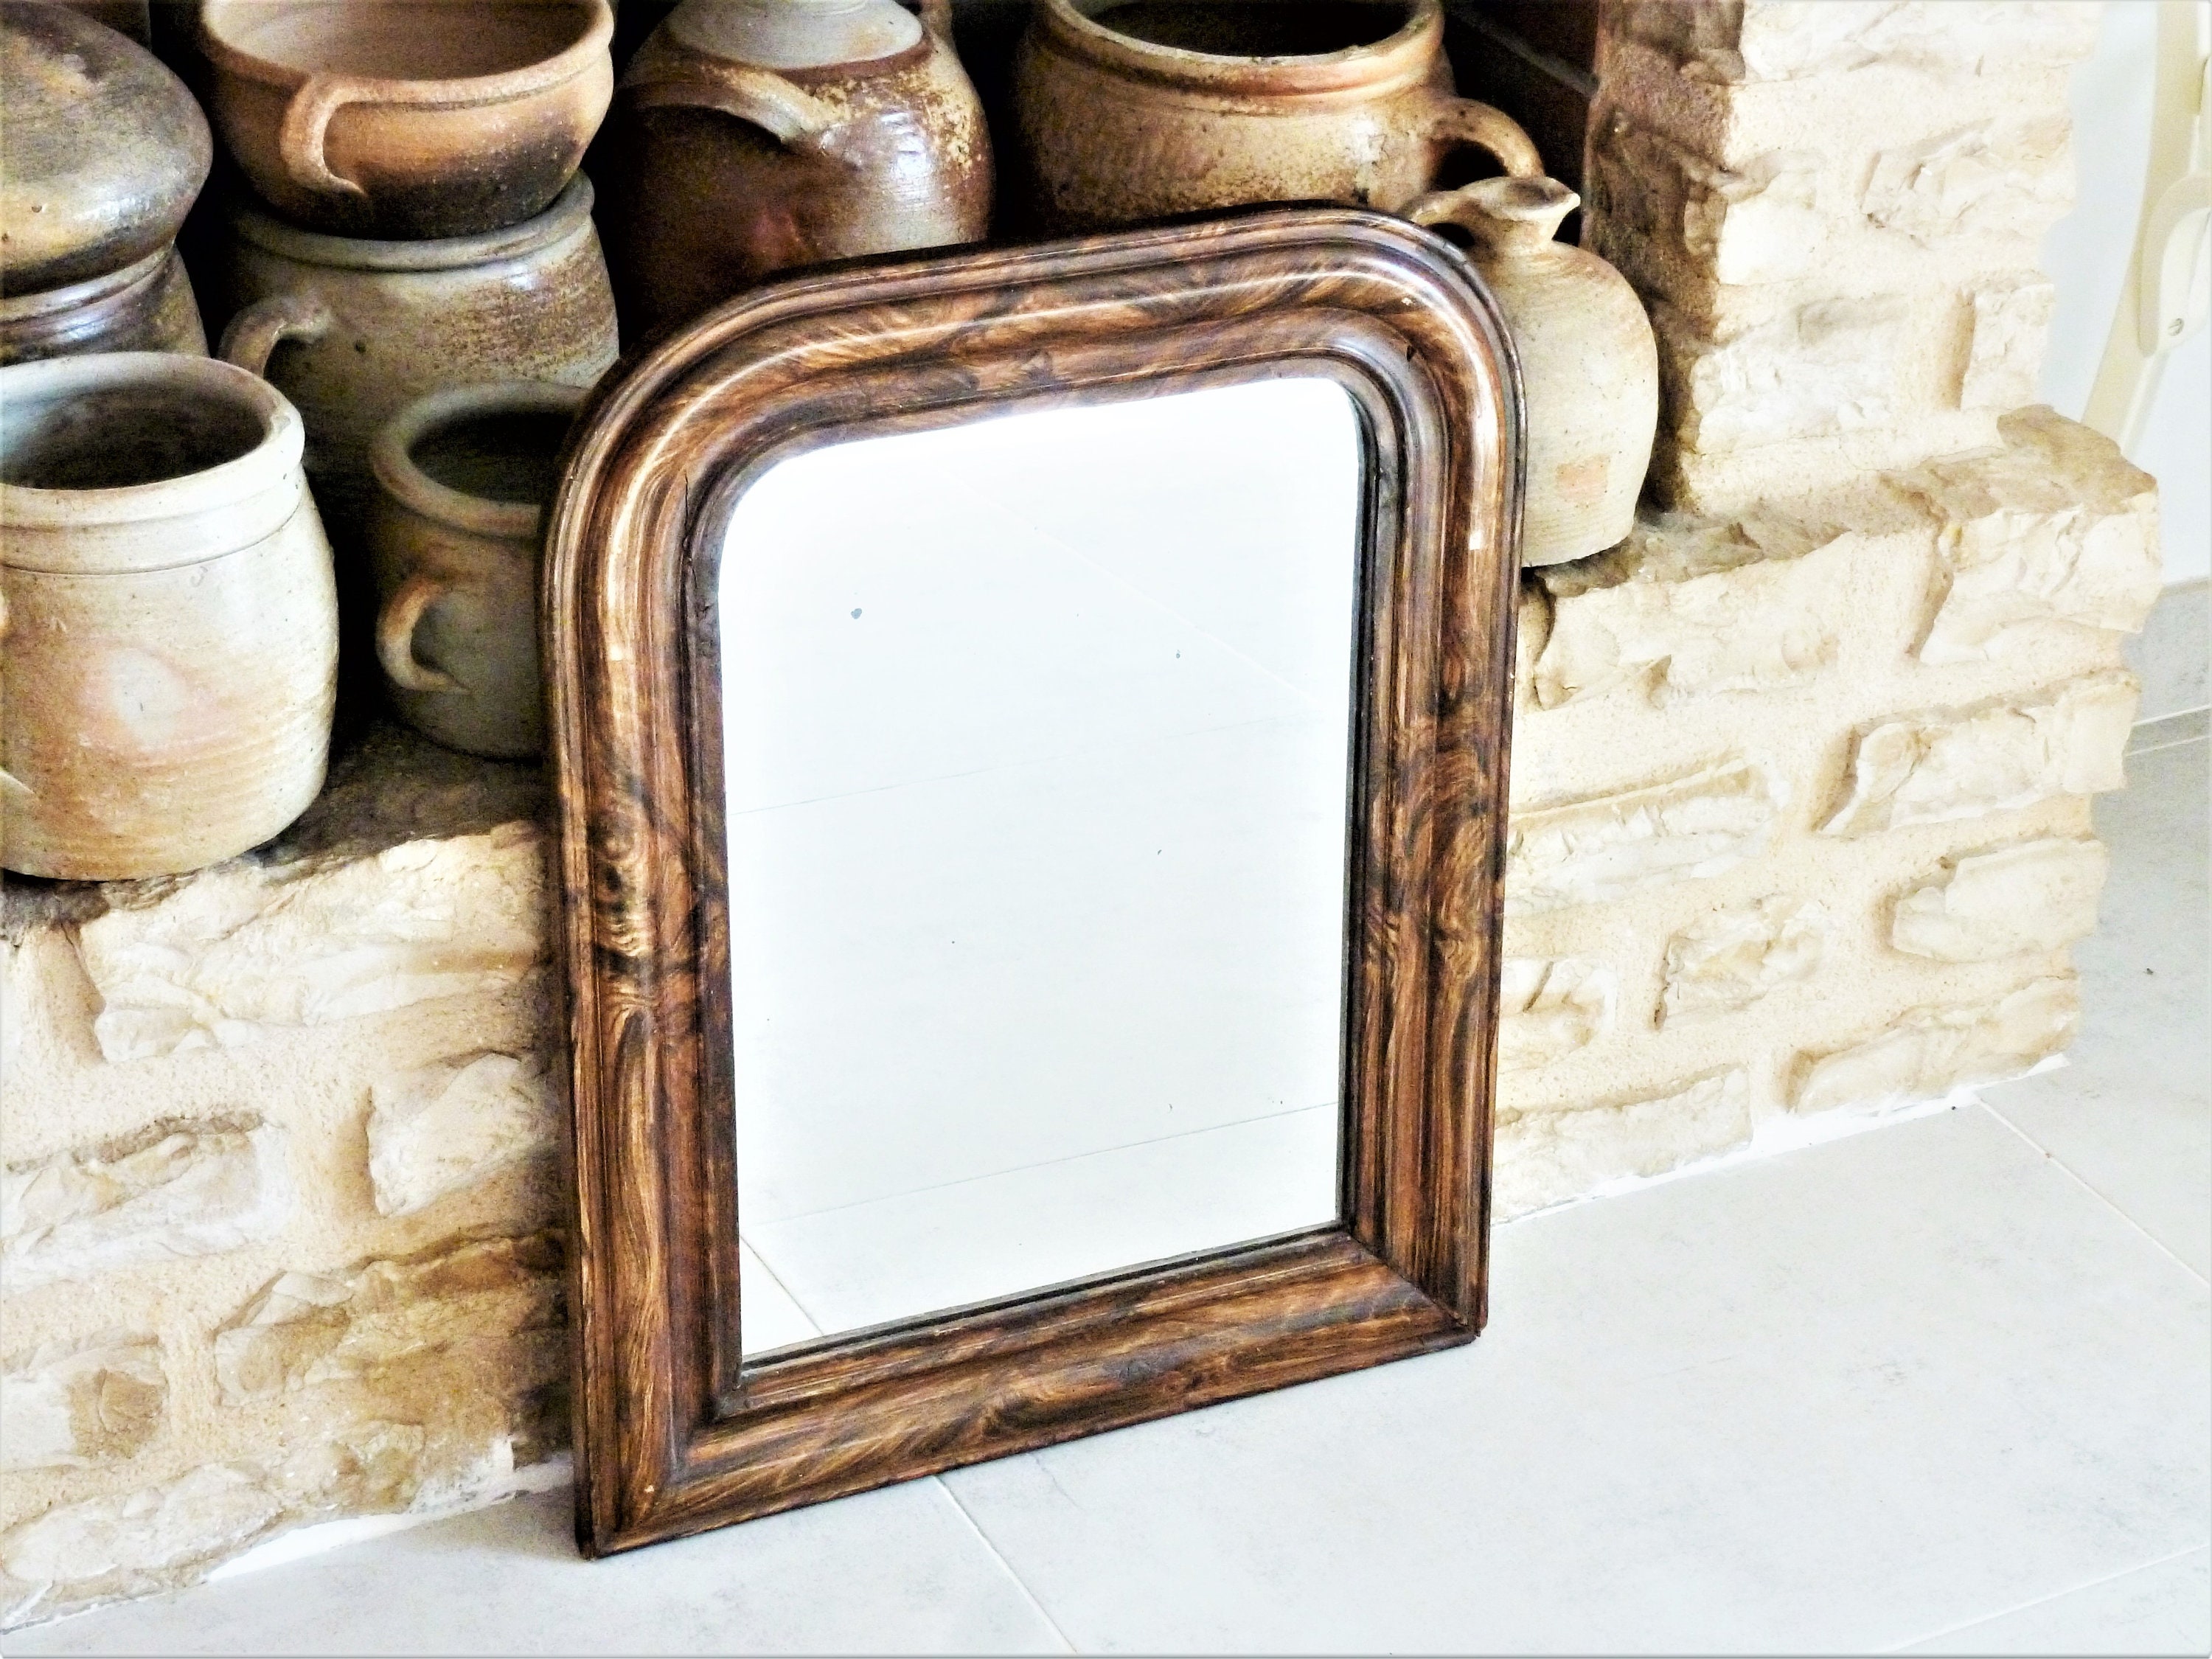 Chateau Gold Louis Philippe Mirror in Stock Now